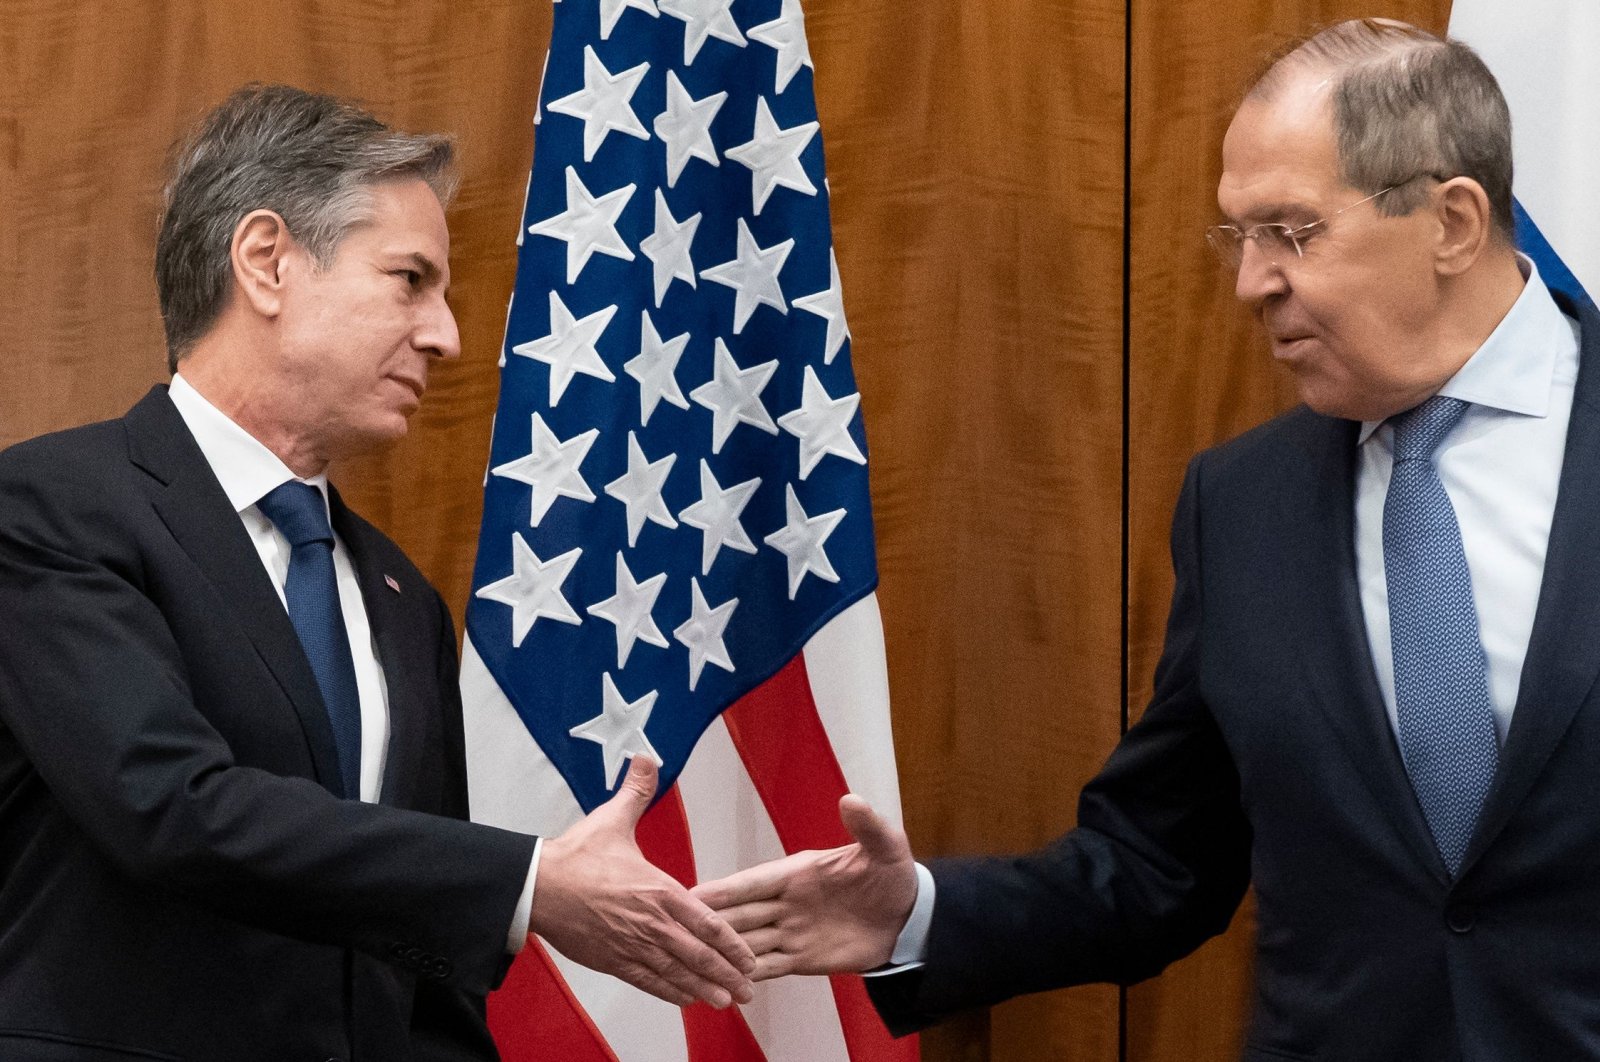 U.S. Secretary of State Antony Blinken (L) and Russian Foreign Minister Sergey Lavrov shake hands before their meeting in Geneva, Switzerland, Jan. 21, 2022. (AFP Photo)